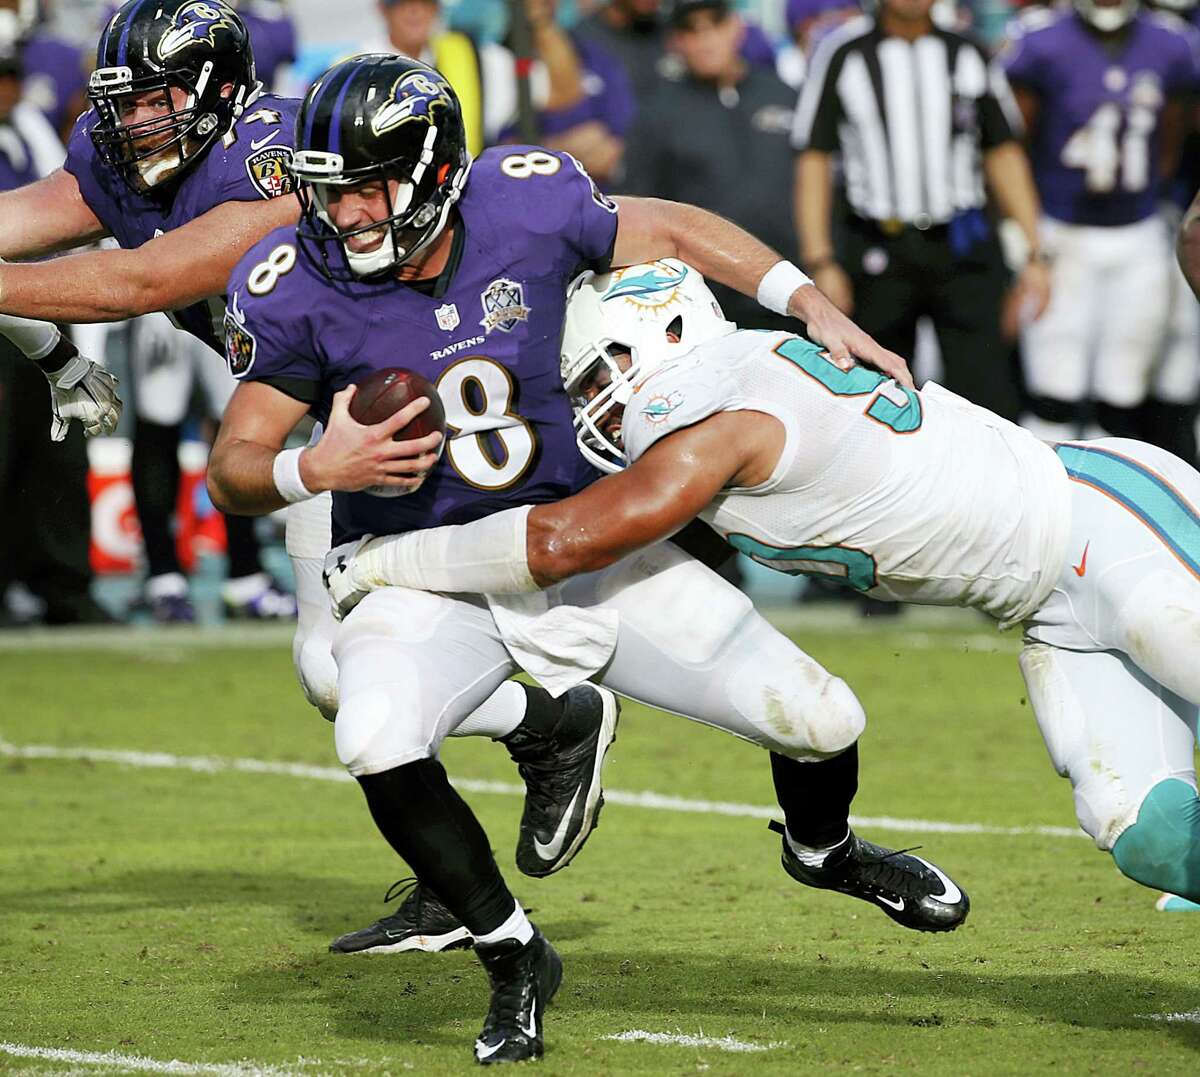 FILE - In this Dec. 6, 2015, file photo, Baltimore Ravens quarterback Matt Schaub (8) is sacked by Miami Dolphins defensive end Olivier Vernon (50), during the second half of an NFL football game, in Miami Gardens, Fla. Defensive end Olivier Vernon's transition tag has been removed by the Dolphins, allowing him to become a free agent hours after the team signed Mario Williams as a replacement. The transition tag was for $12.734 million, but the Dolphins withdrew the offer Wednesday, March 9, 2016, making it likely Vernon will depart after four seasons in Miami. (AP Photo/Wilfredo Lee, File)